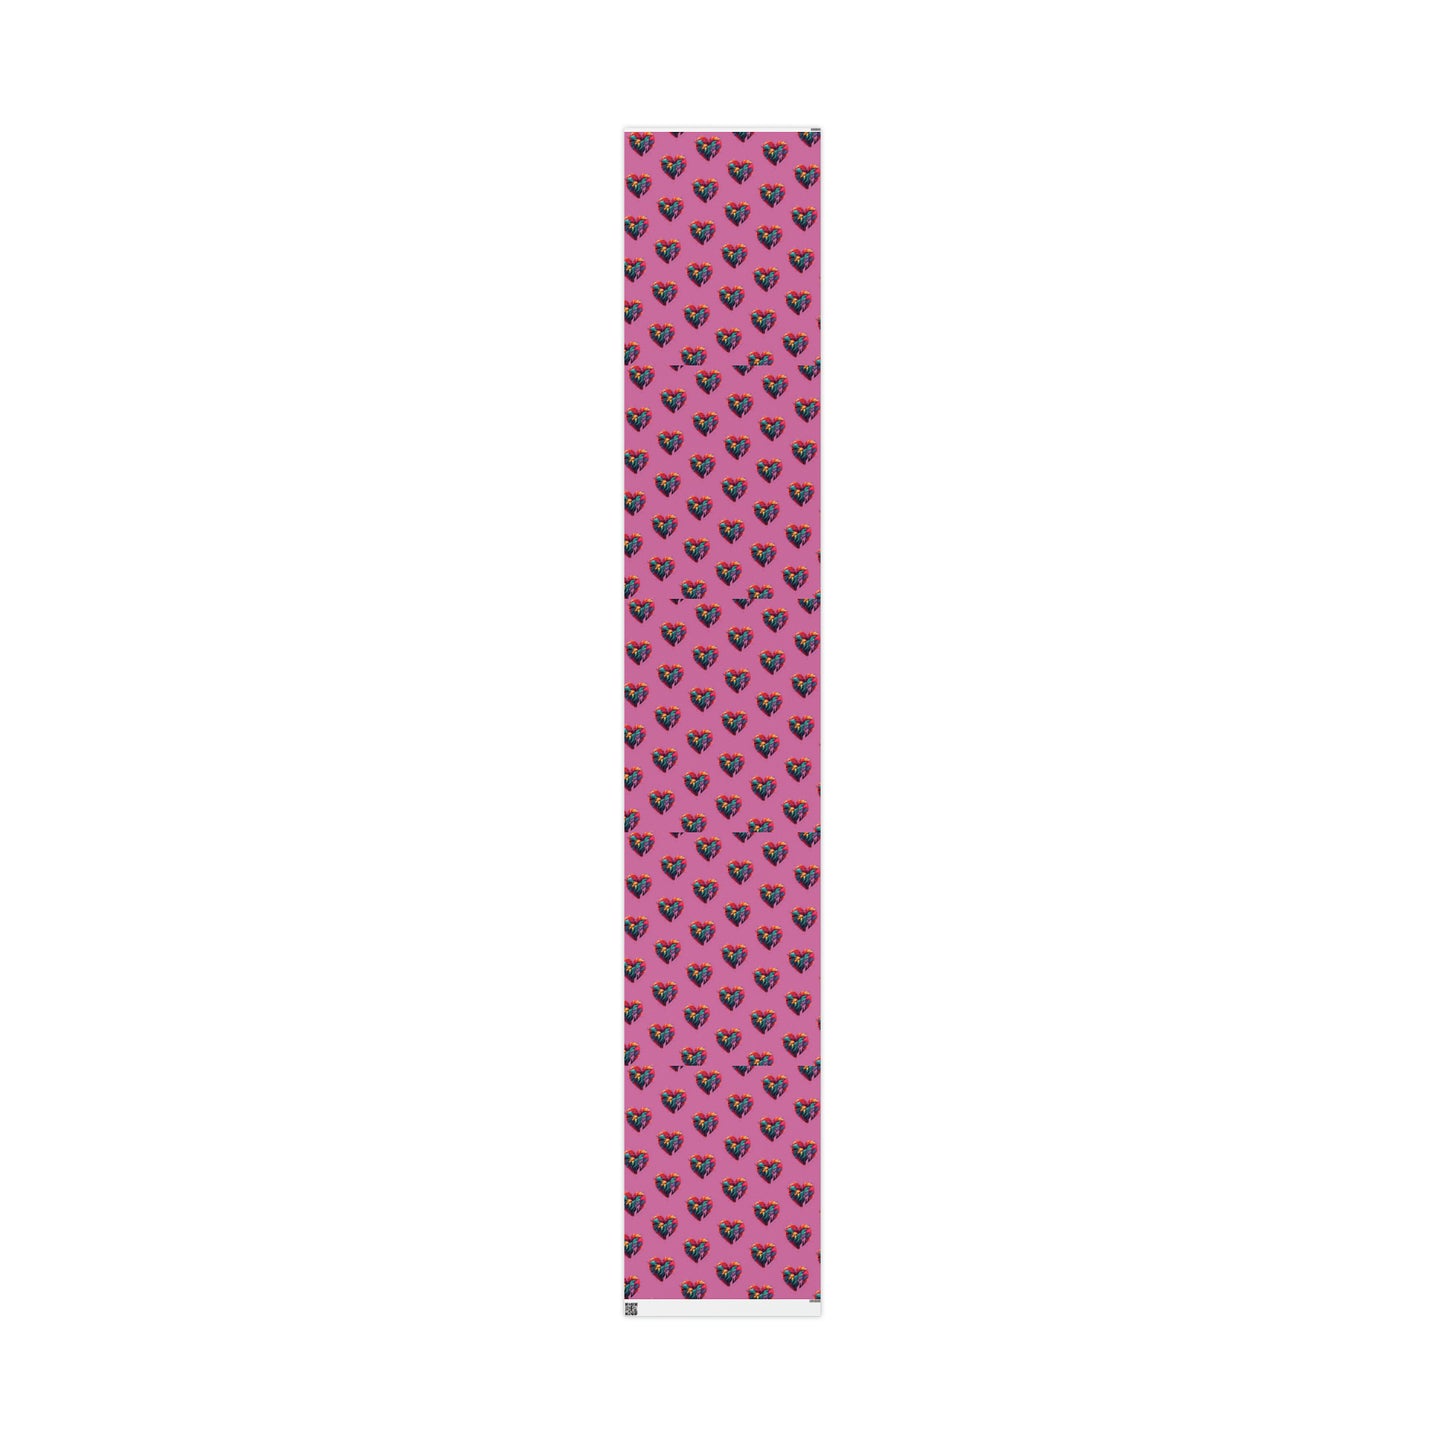 InterPETation 2024 Valentine's Gift Wrapping Papers